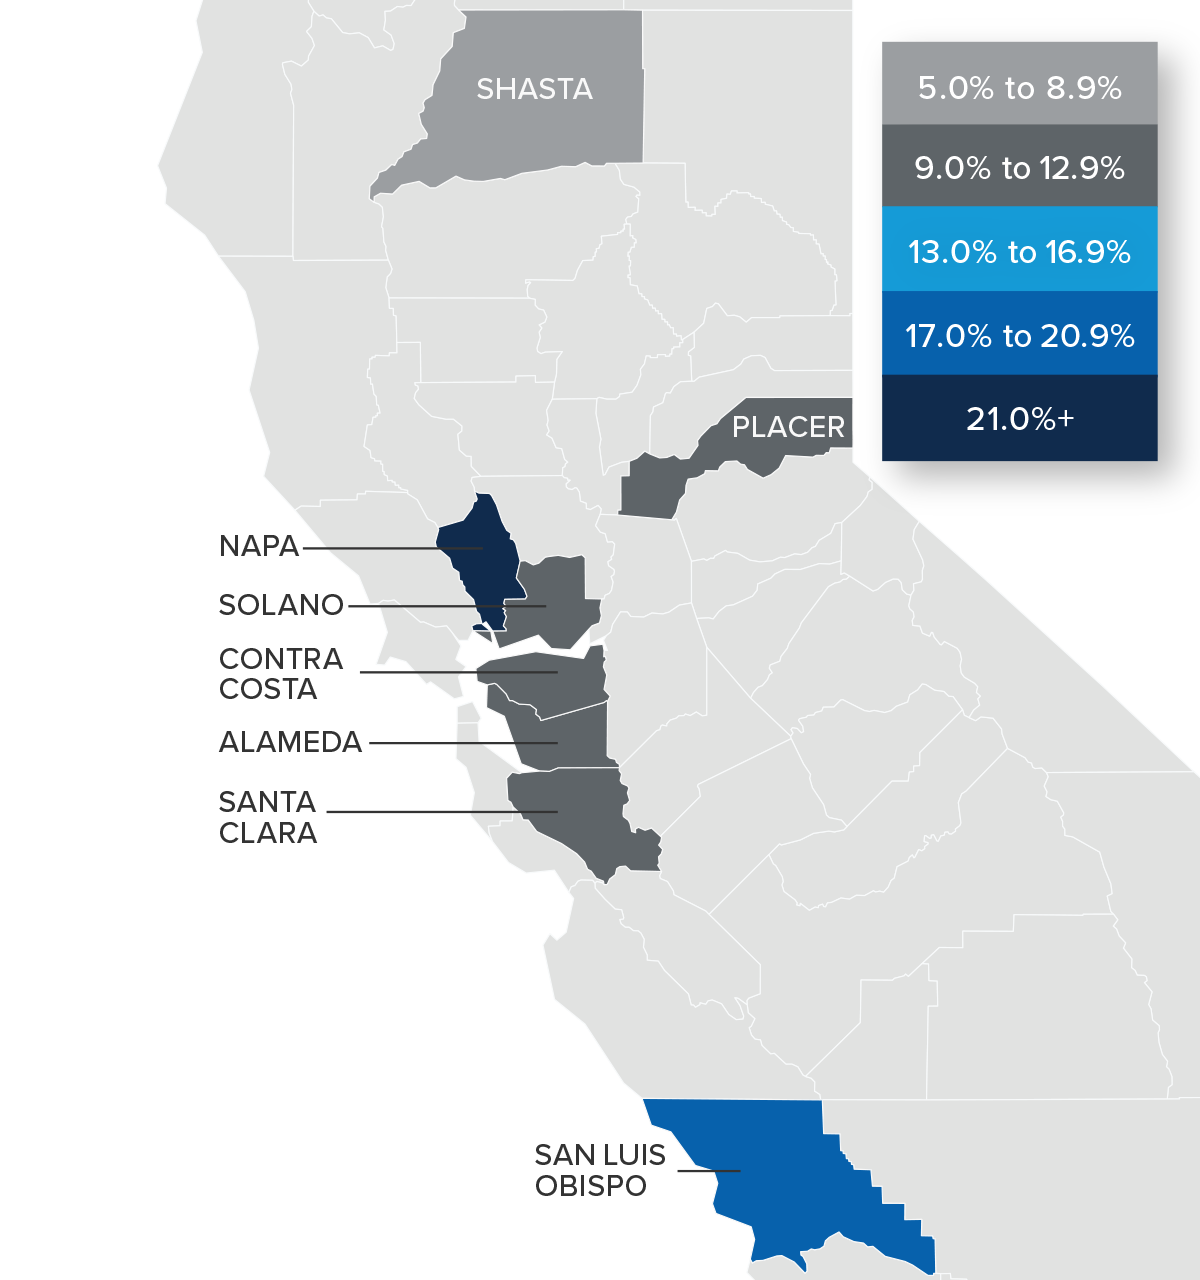 A map showing the real estate home prices percentage changes for various counties in Northern California. Different colors correspond to different tiers of percentage change. Shasta County is the the only county with a percentage change in the 5% to 8.9% range, while Placer, Solano, Contra Costa, Alameda, and Santa Clara are in the 9% to 12.9% change range. San Luis Obispo is in the 17% to 20.9% change range, and Napa County is the only county in the 21% + change range.